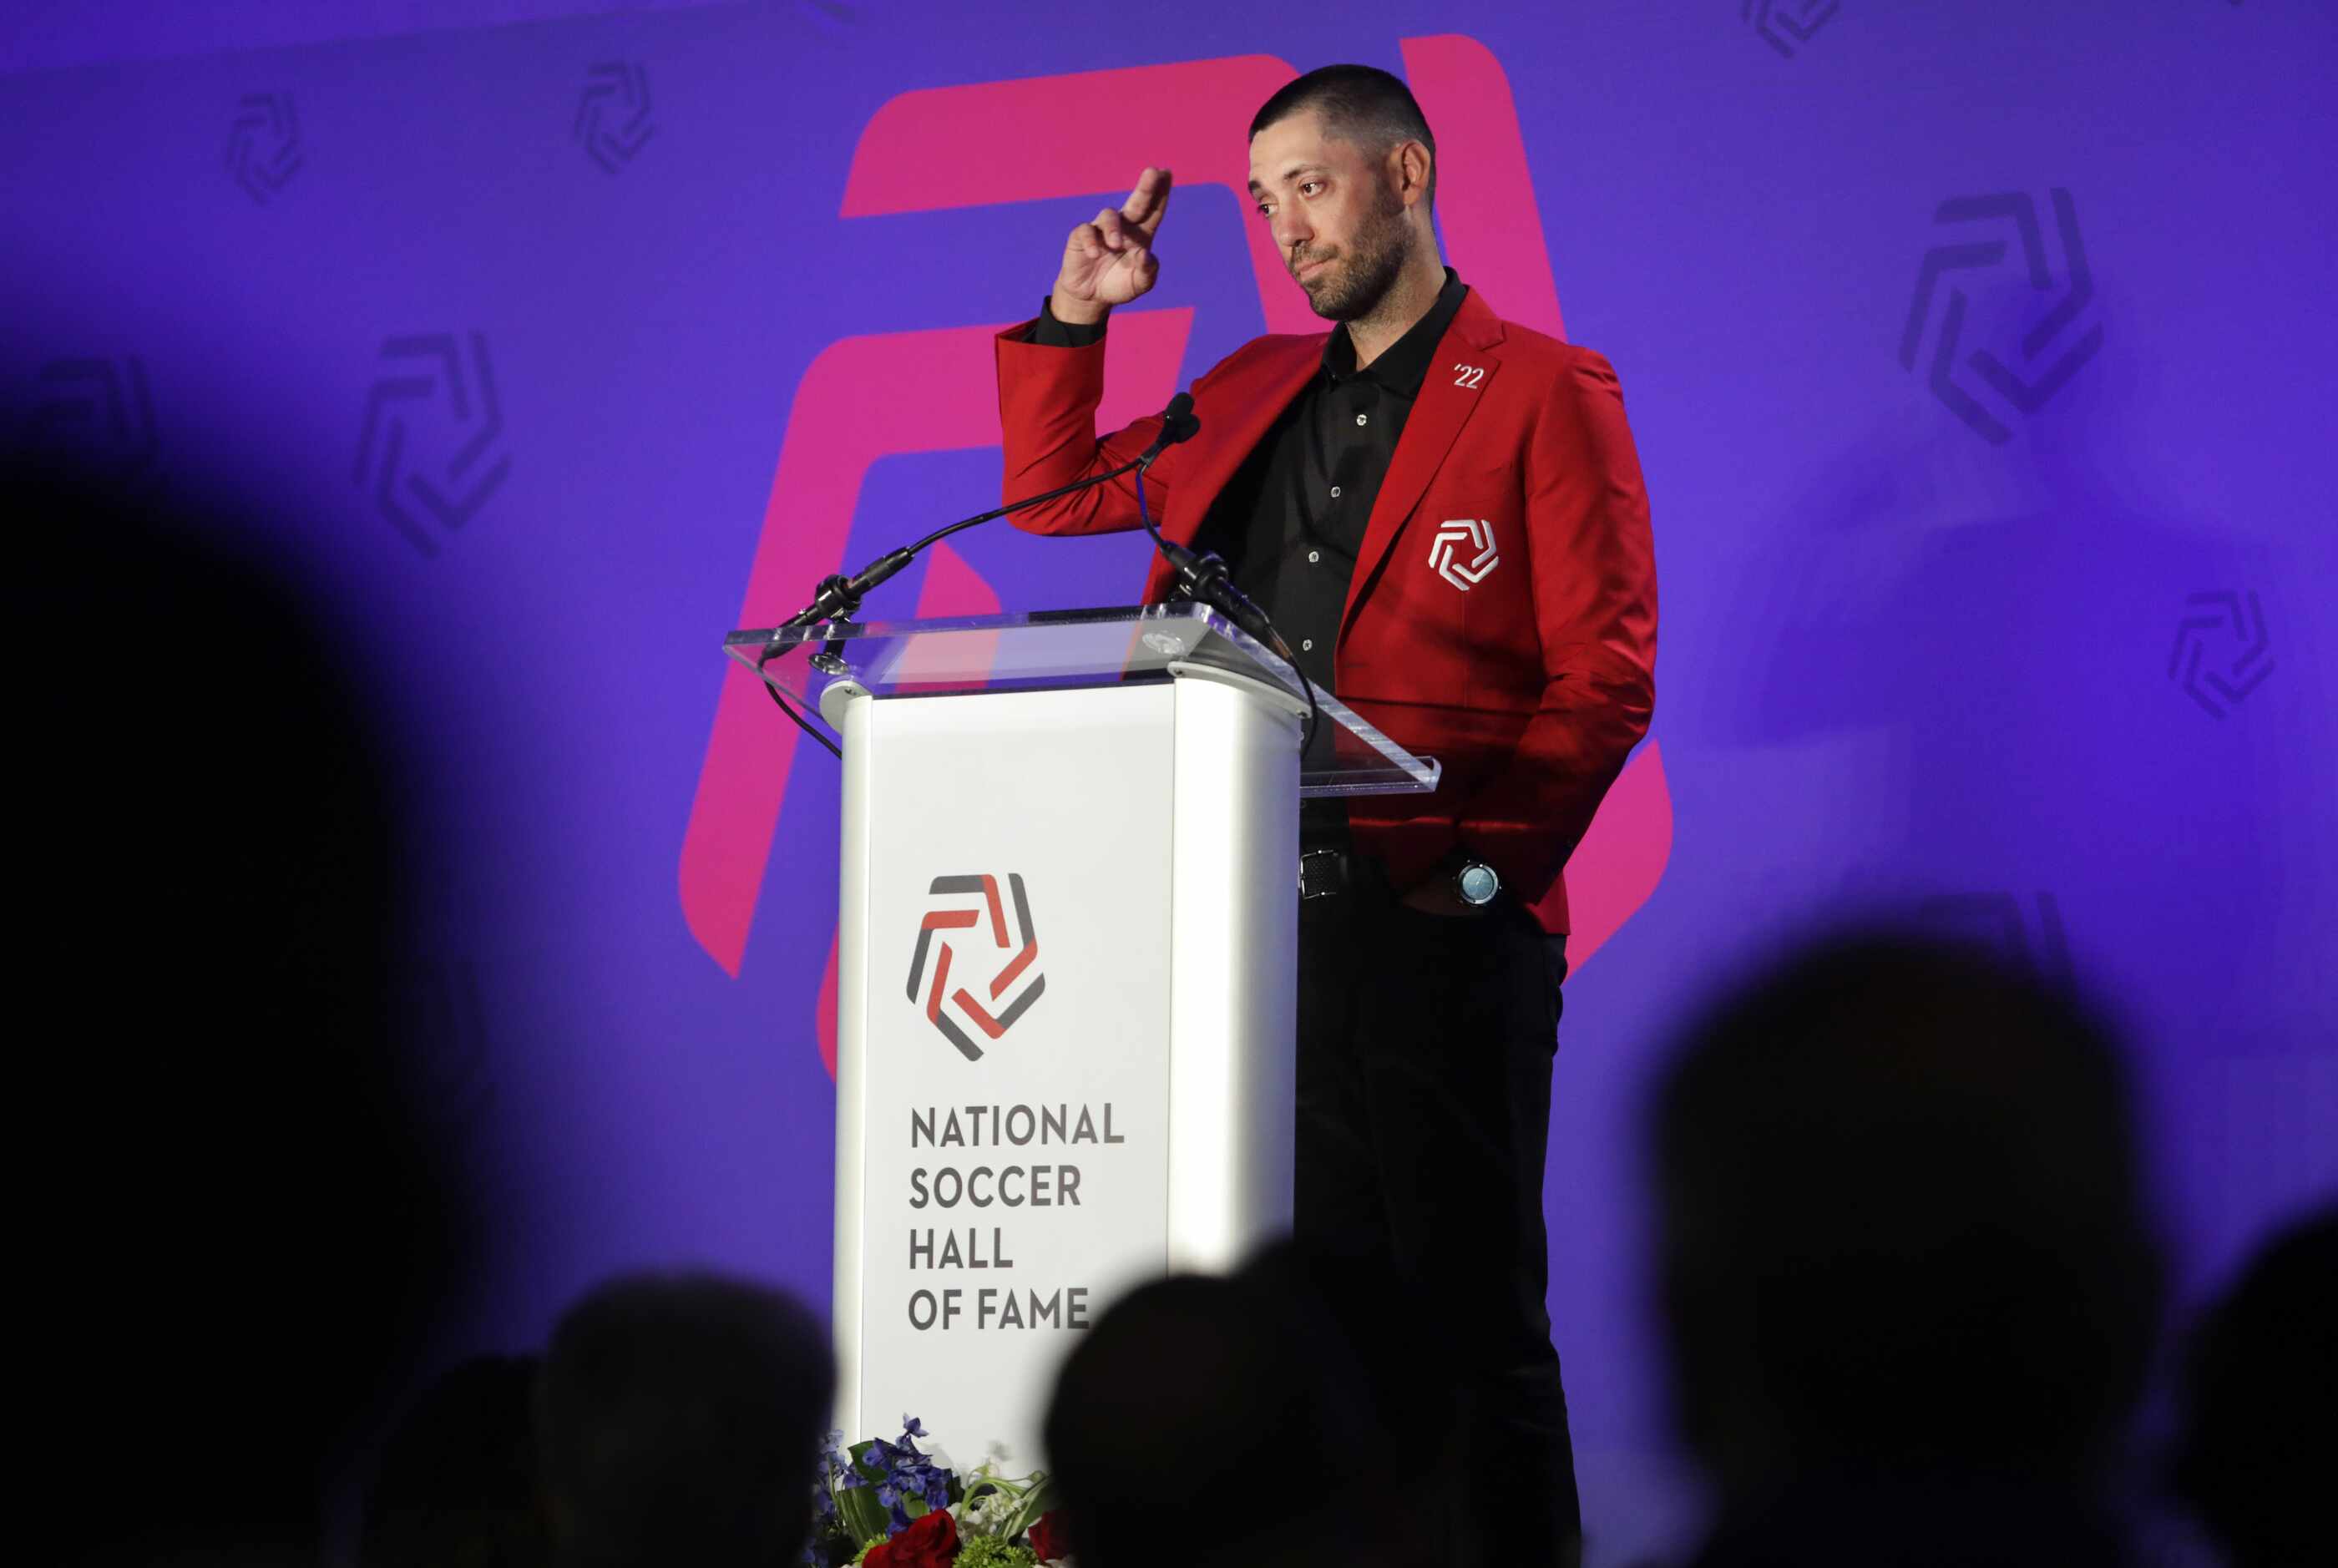 Clint Dempsey thanks the crowd for his induction during the National Soccer Hall of Fame...